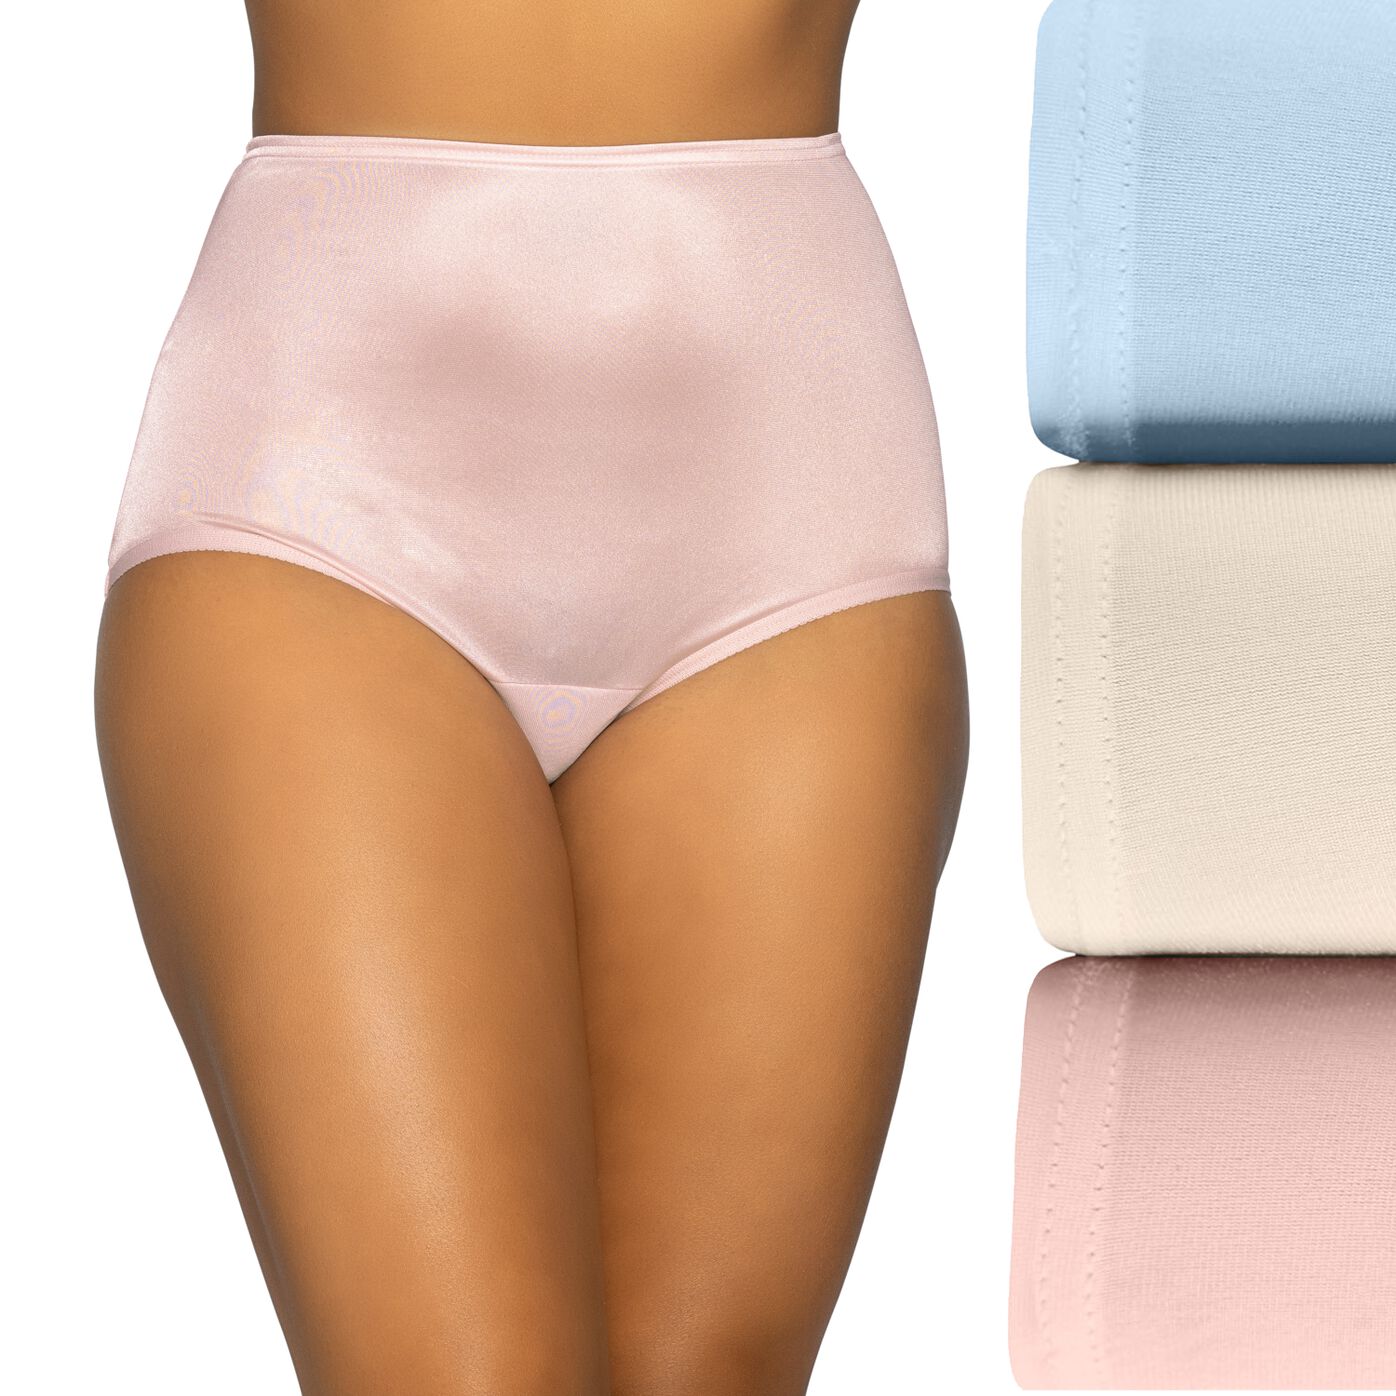 Perfectly Yours Ravissant Tailored Full Brief Panty, 3 Pack